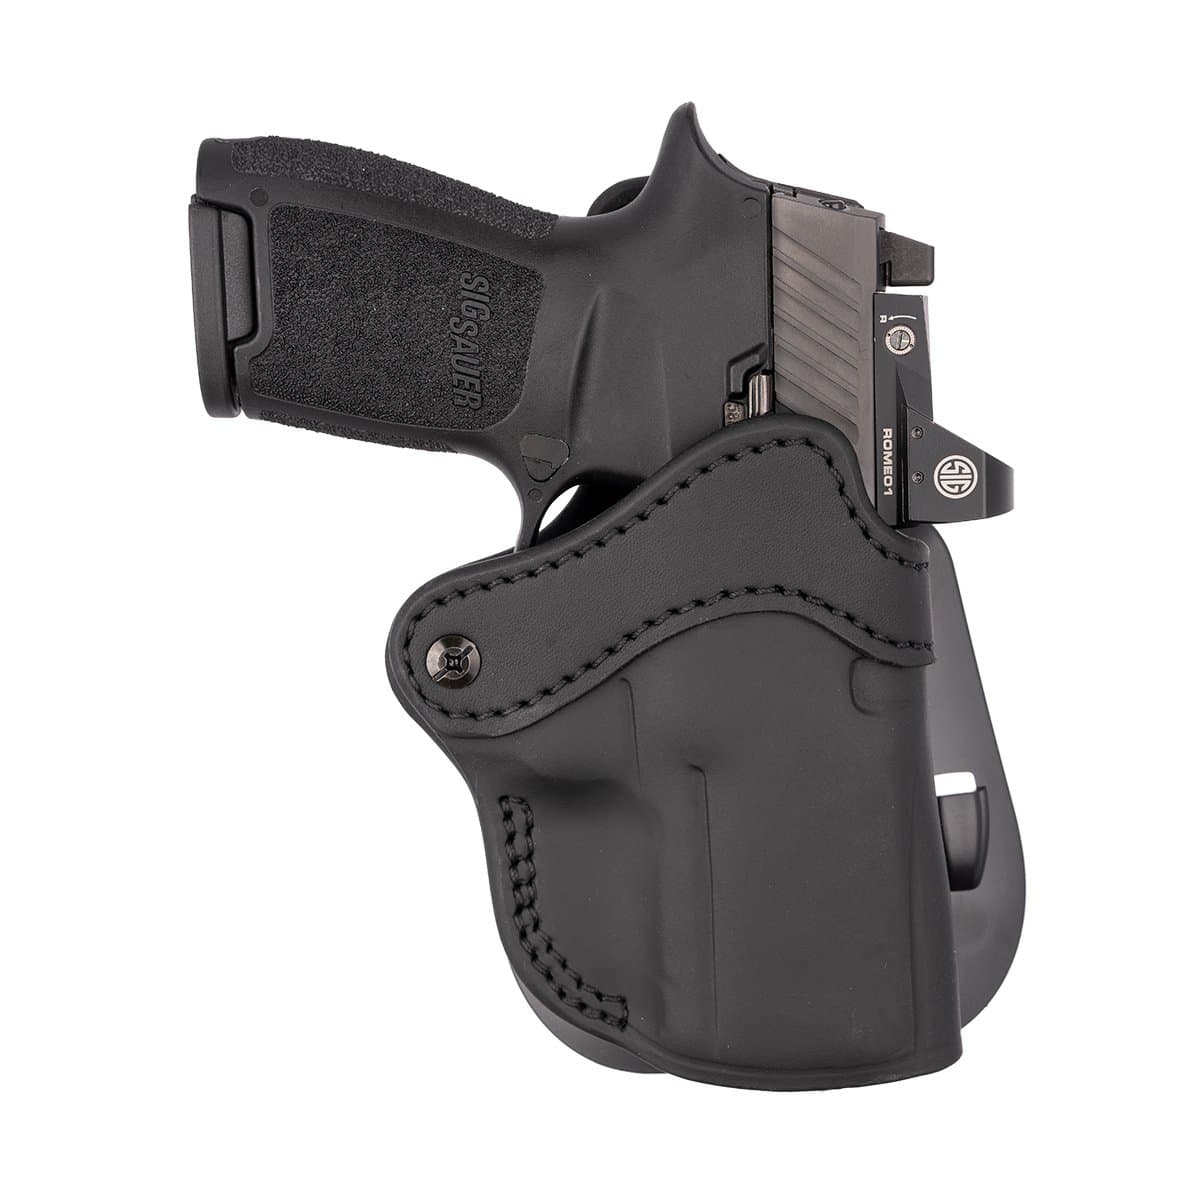 3. Finding the Right Balance between Comfort and Concealment for Compact Firearms